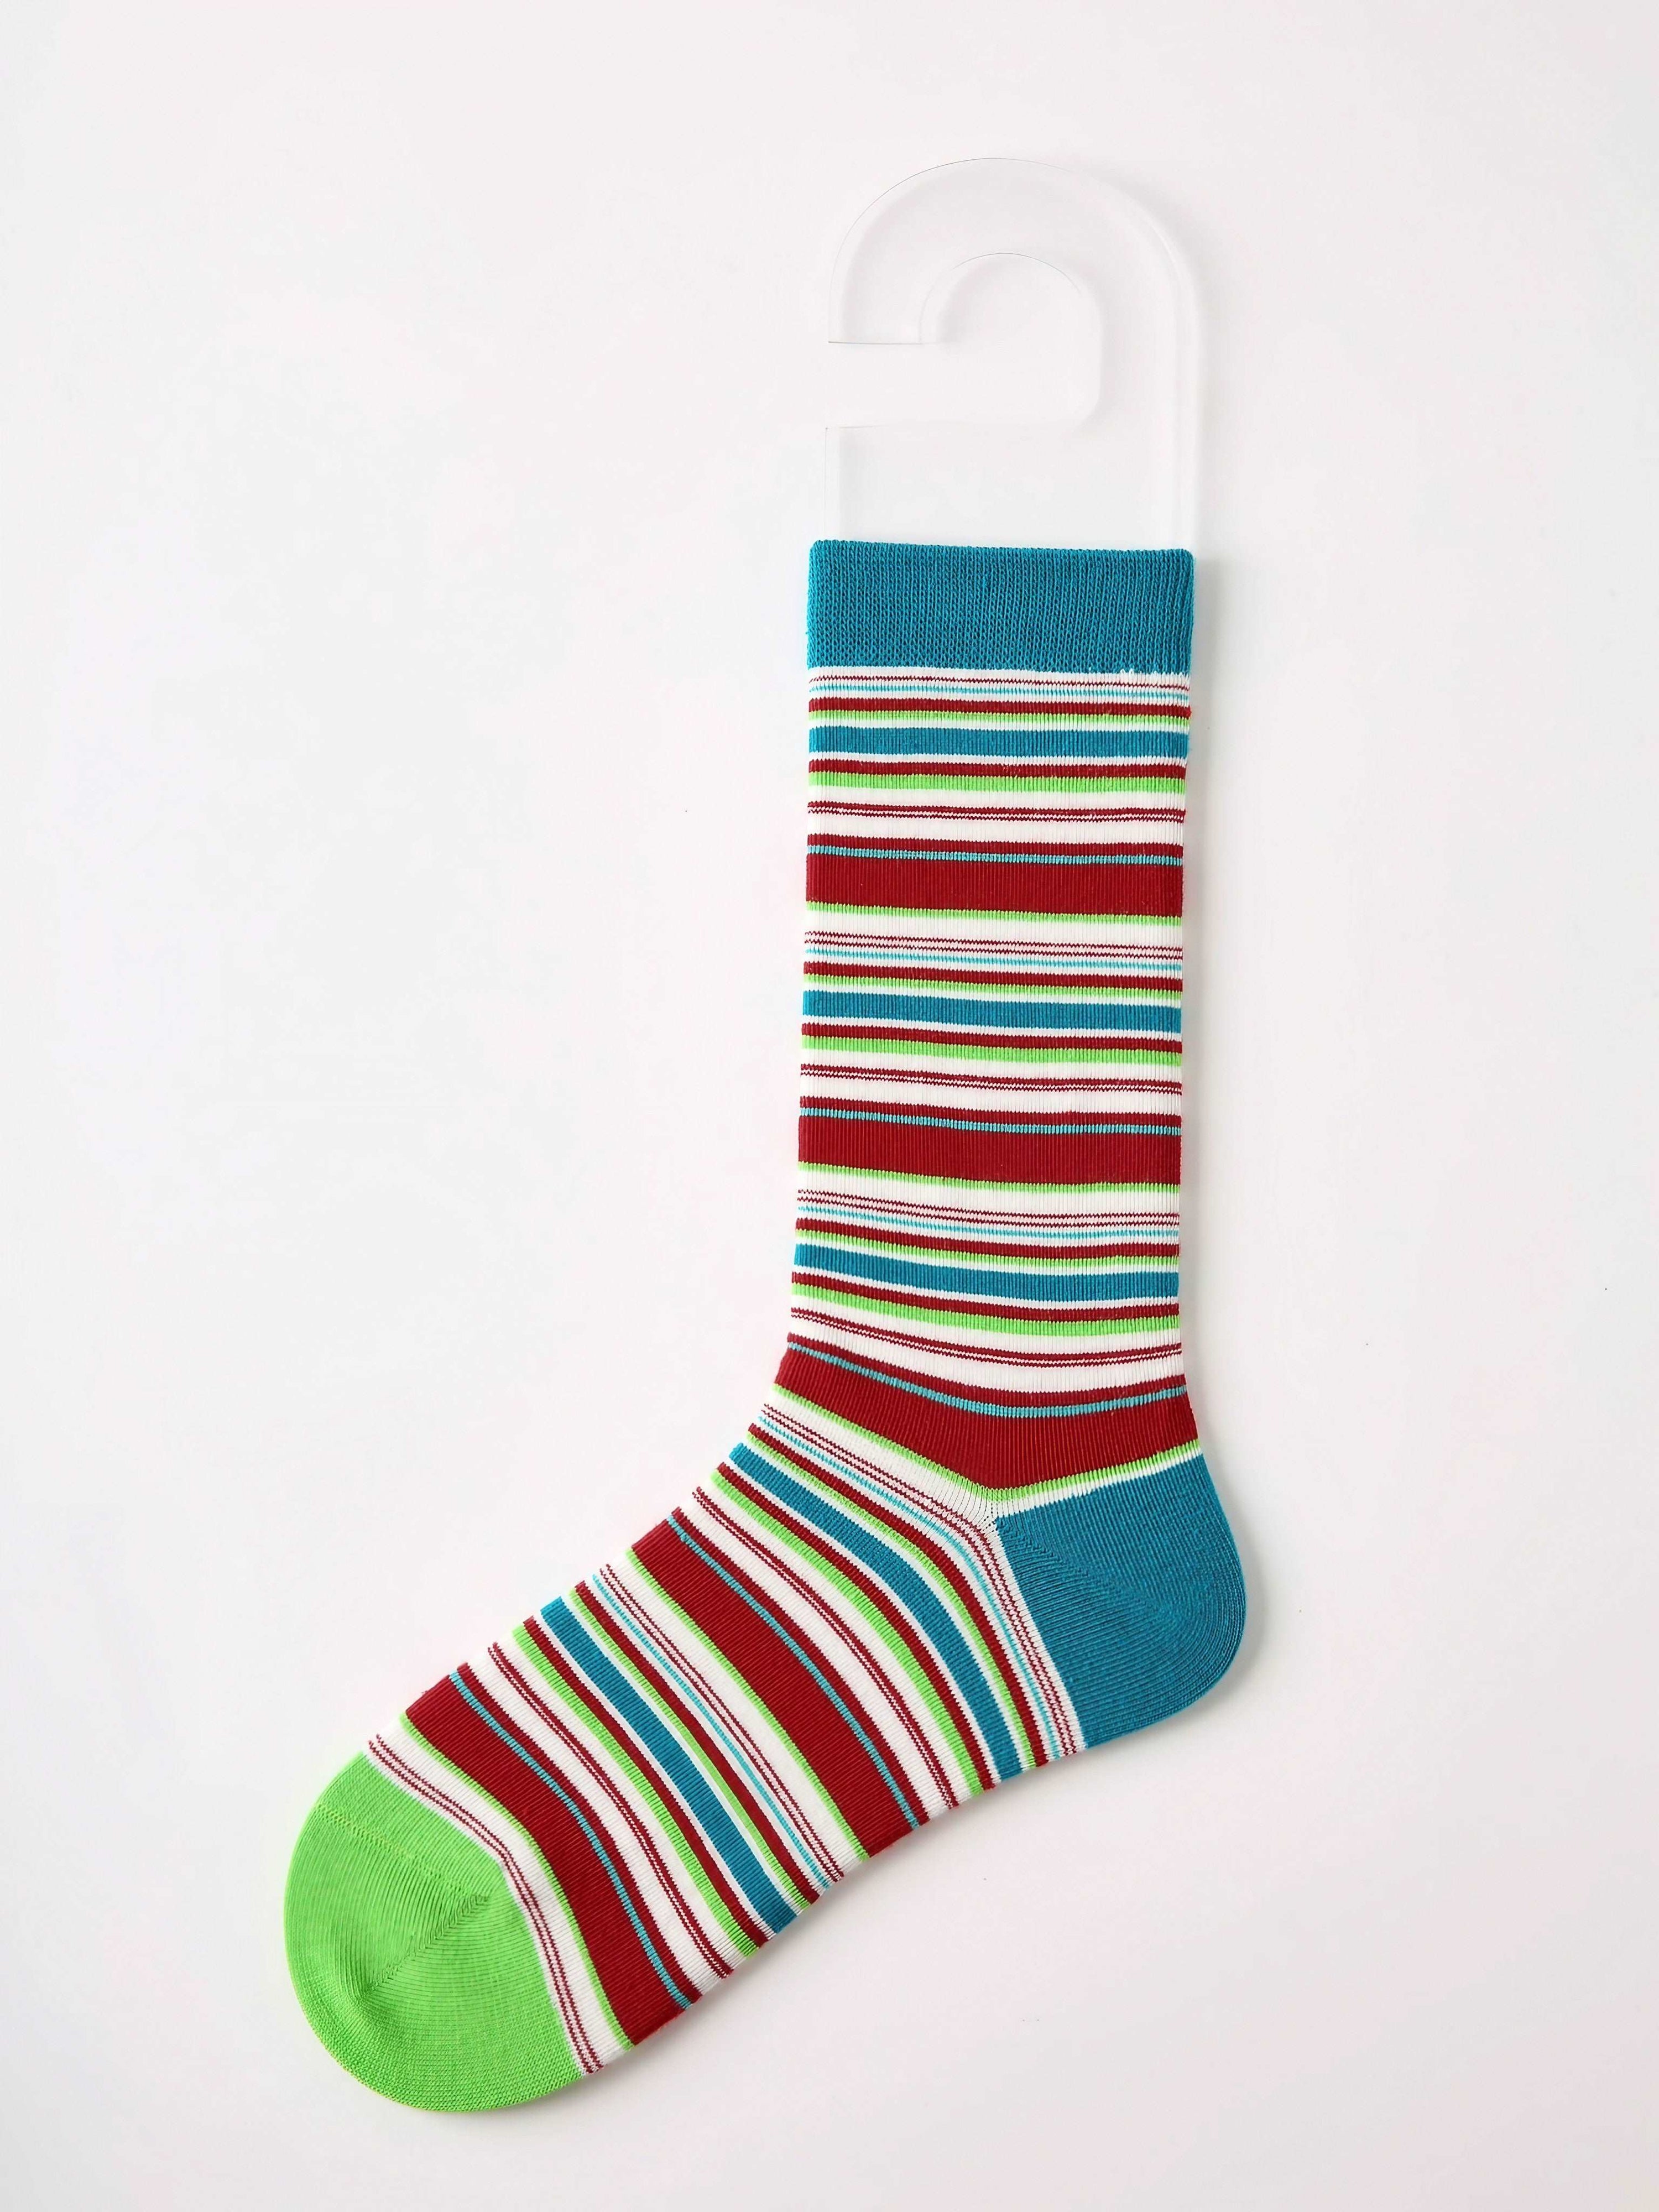 Blackpink Funky Socks featuring colorful stripes against a pristine white backdrop